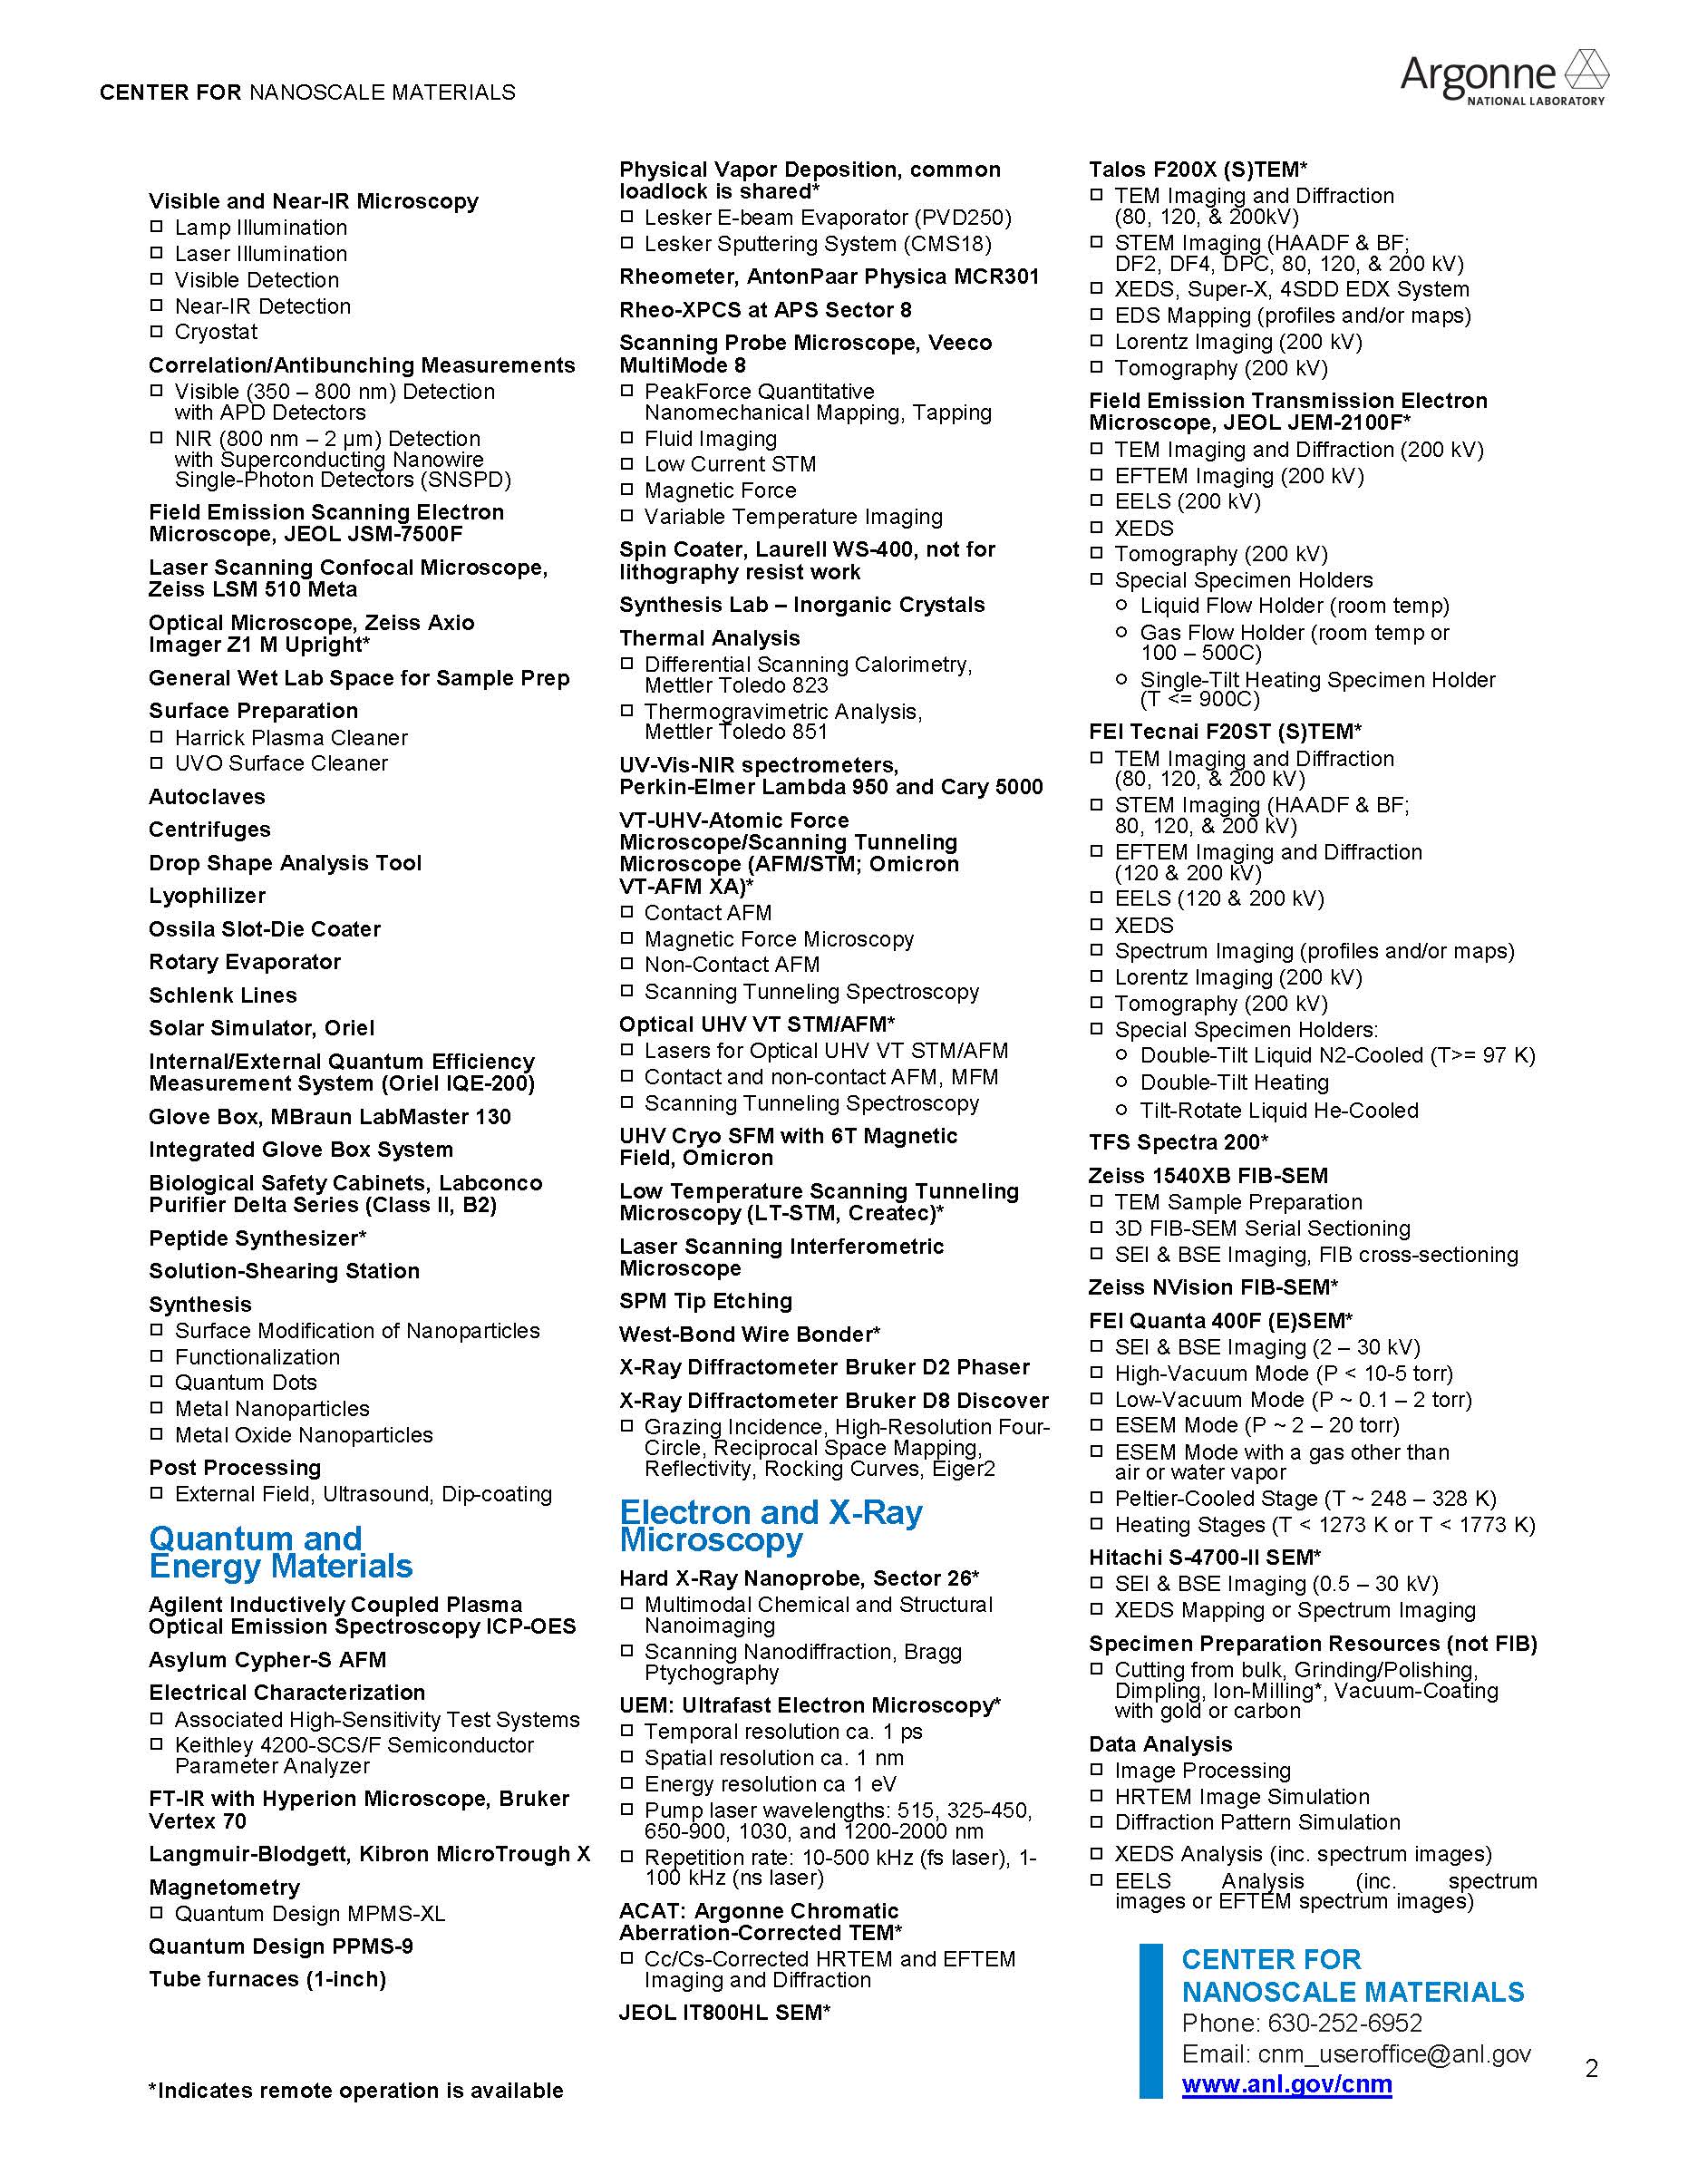 CNM Tools and Capabilities Page 2